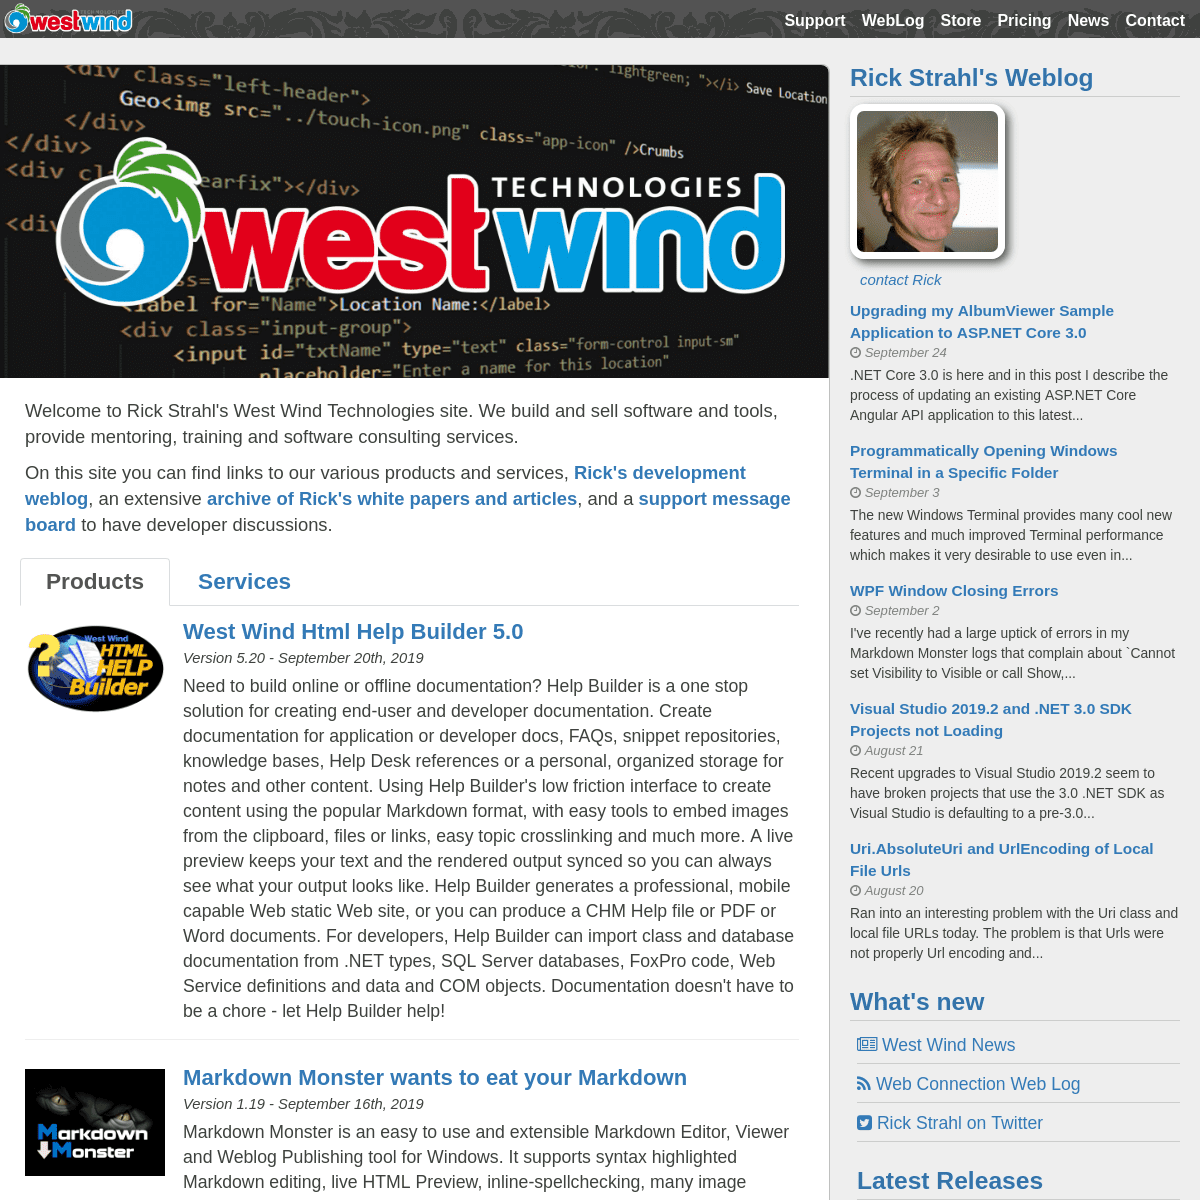 West Wind Technologies - Making Waves on the Web